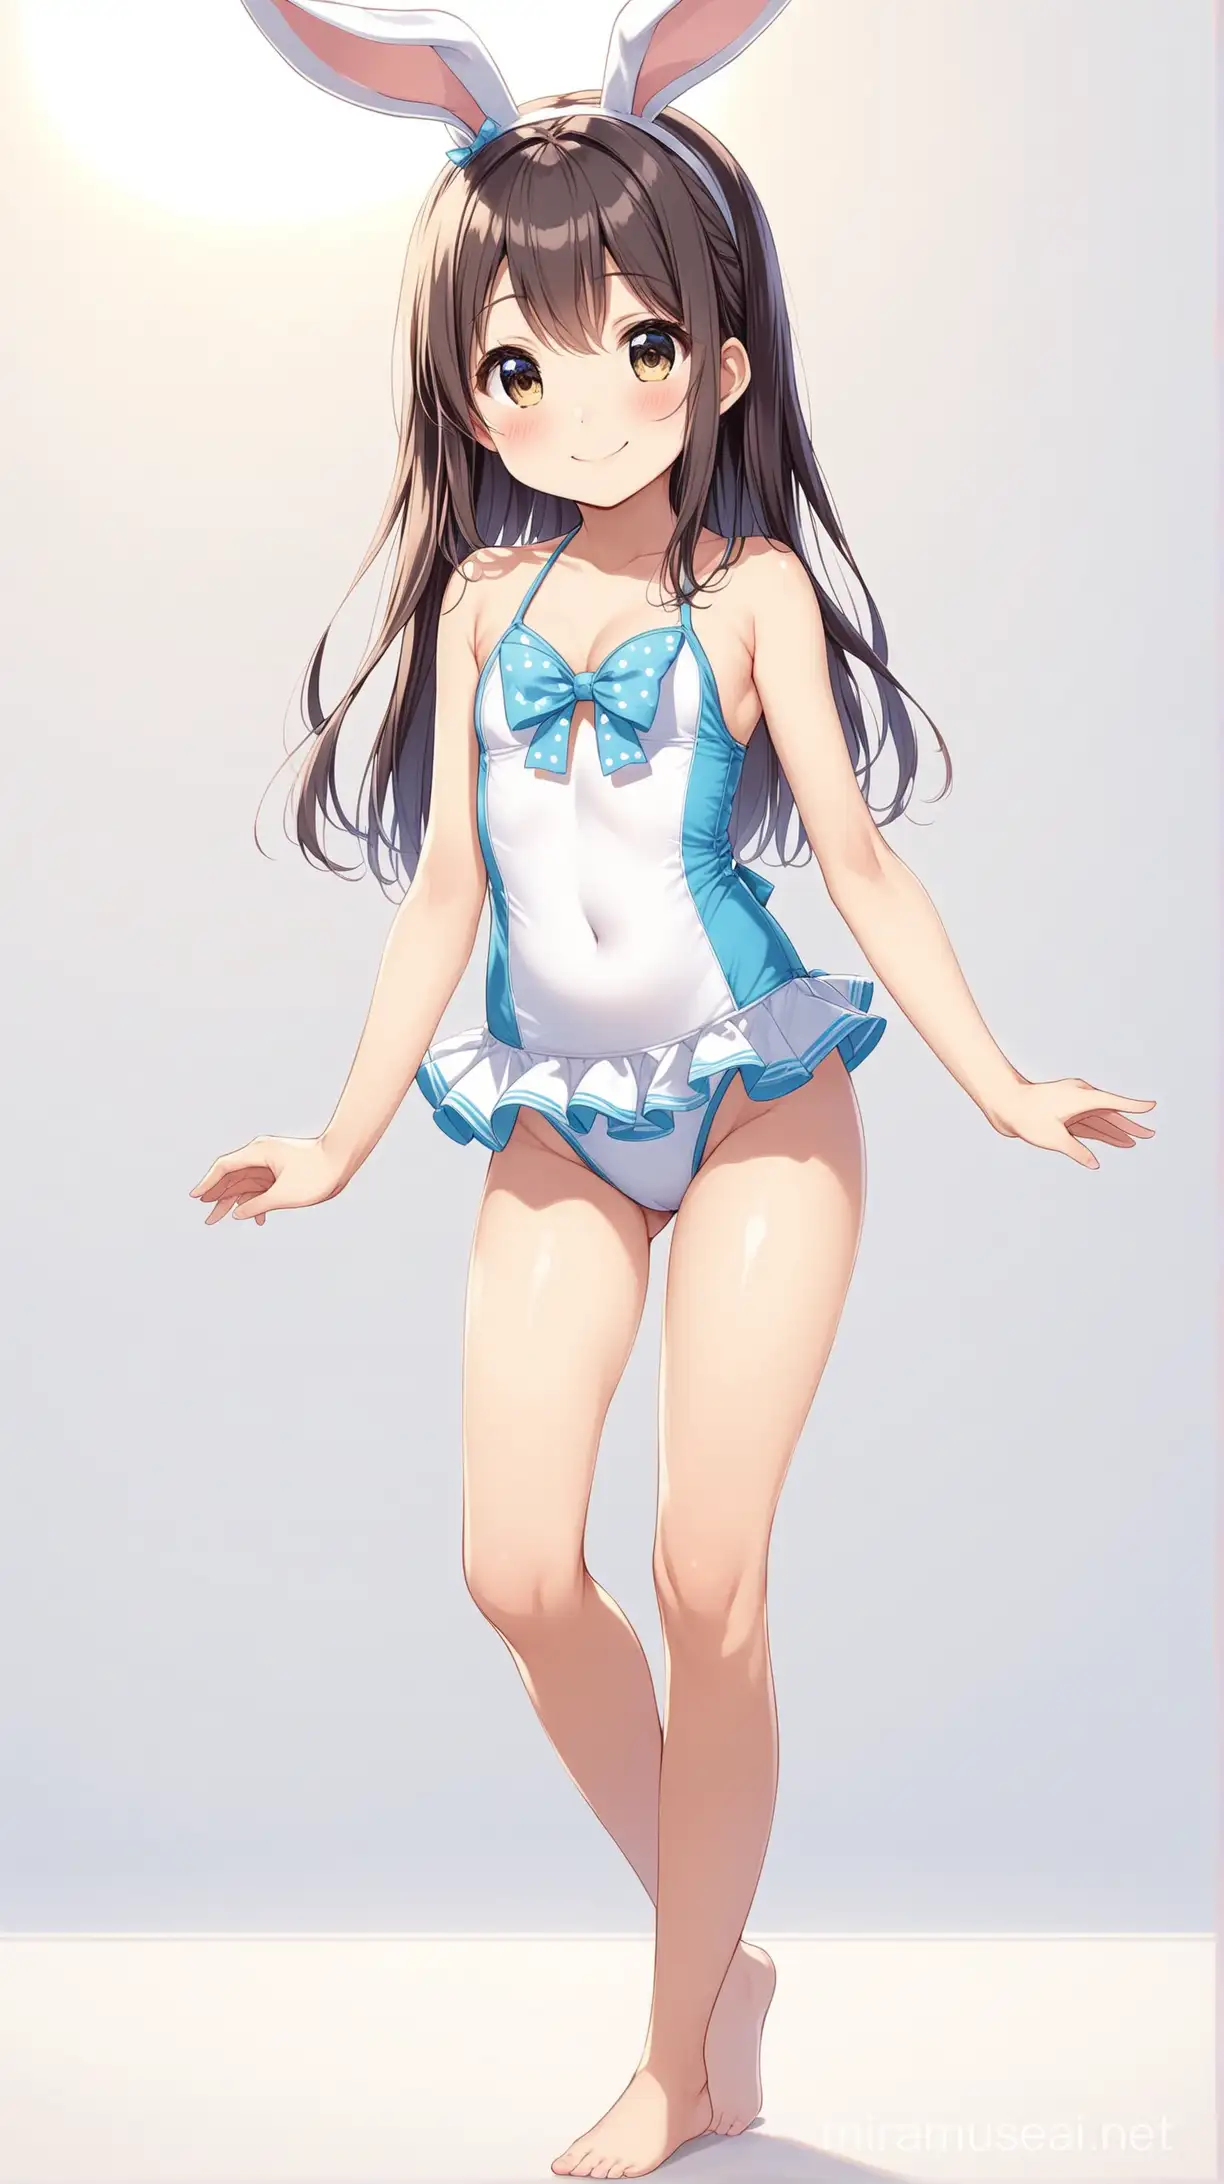 Kafuu Chino/Is The Order a Rabbit?, small and petite body, high quality, natural lighting, full body, white background, cute pose, swimsuit, smiling